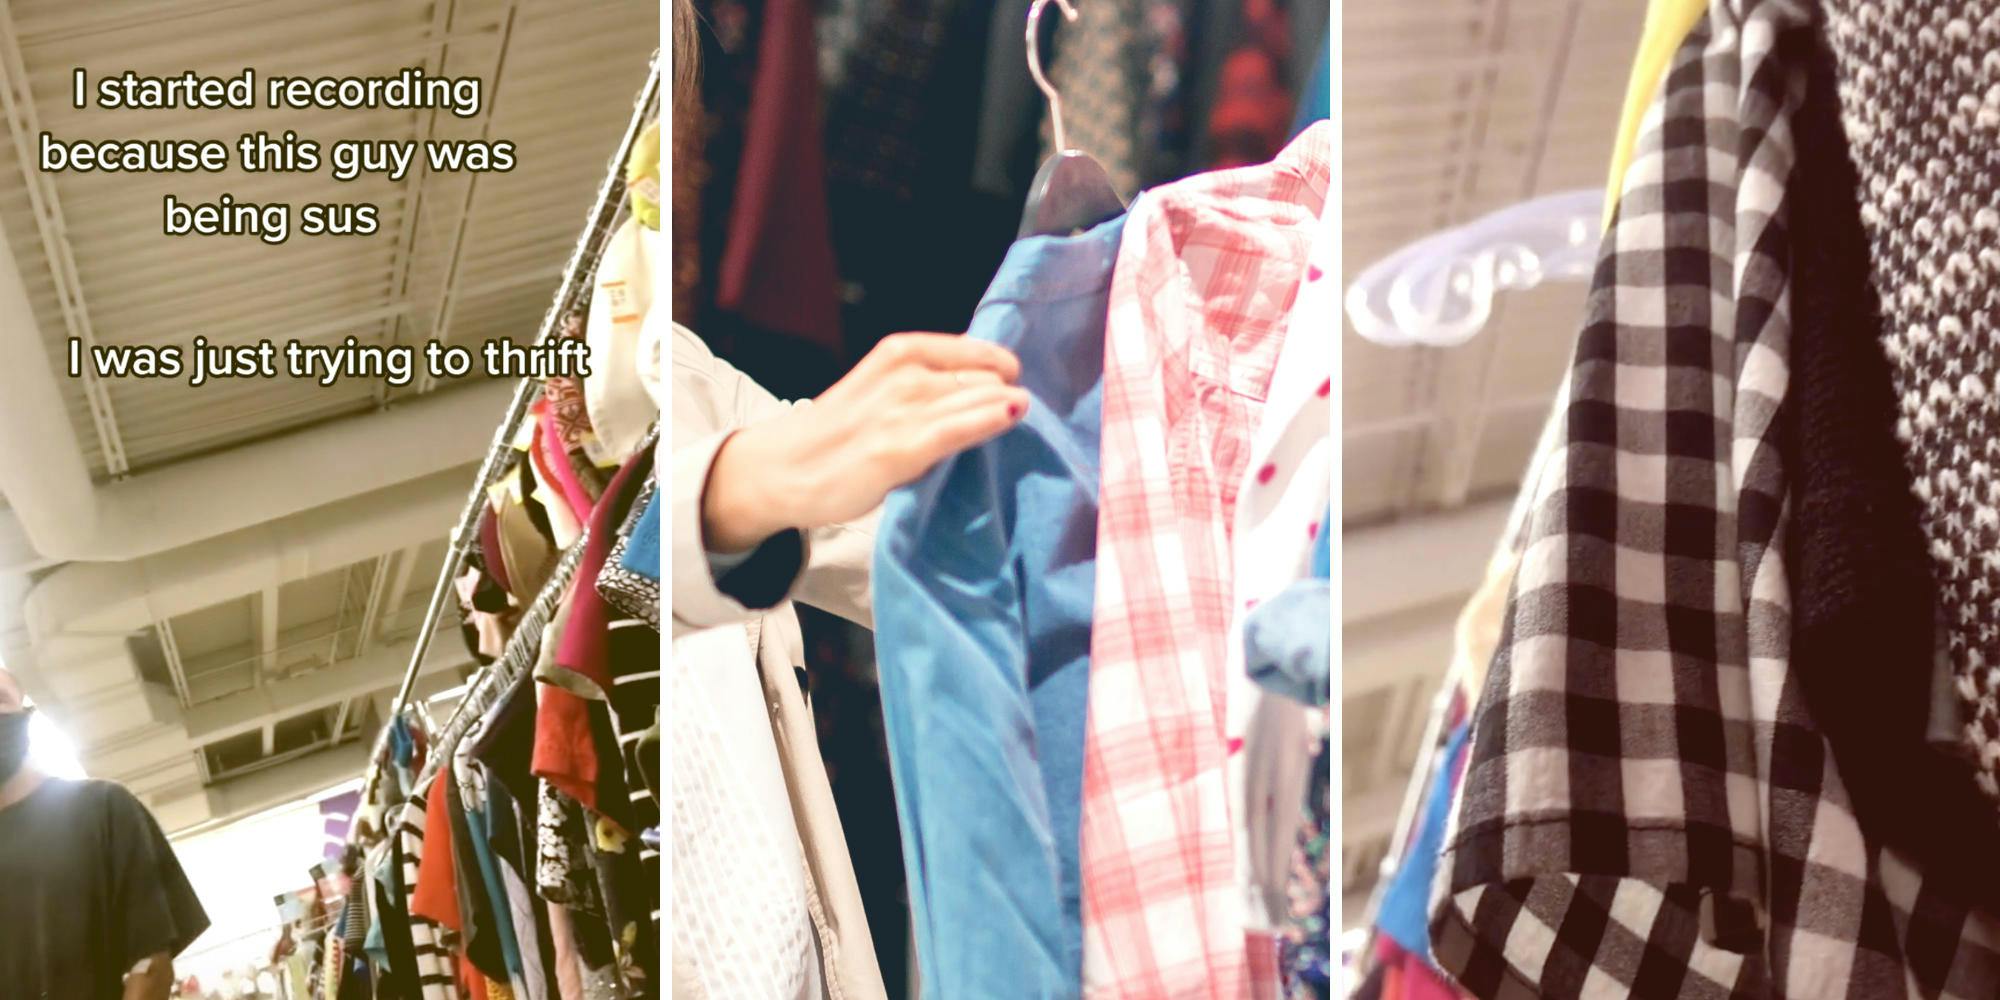 man approaching someone at a thrift store (l) photo of a woman shopping (m) photo of clothes at a thrift store (r)